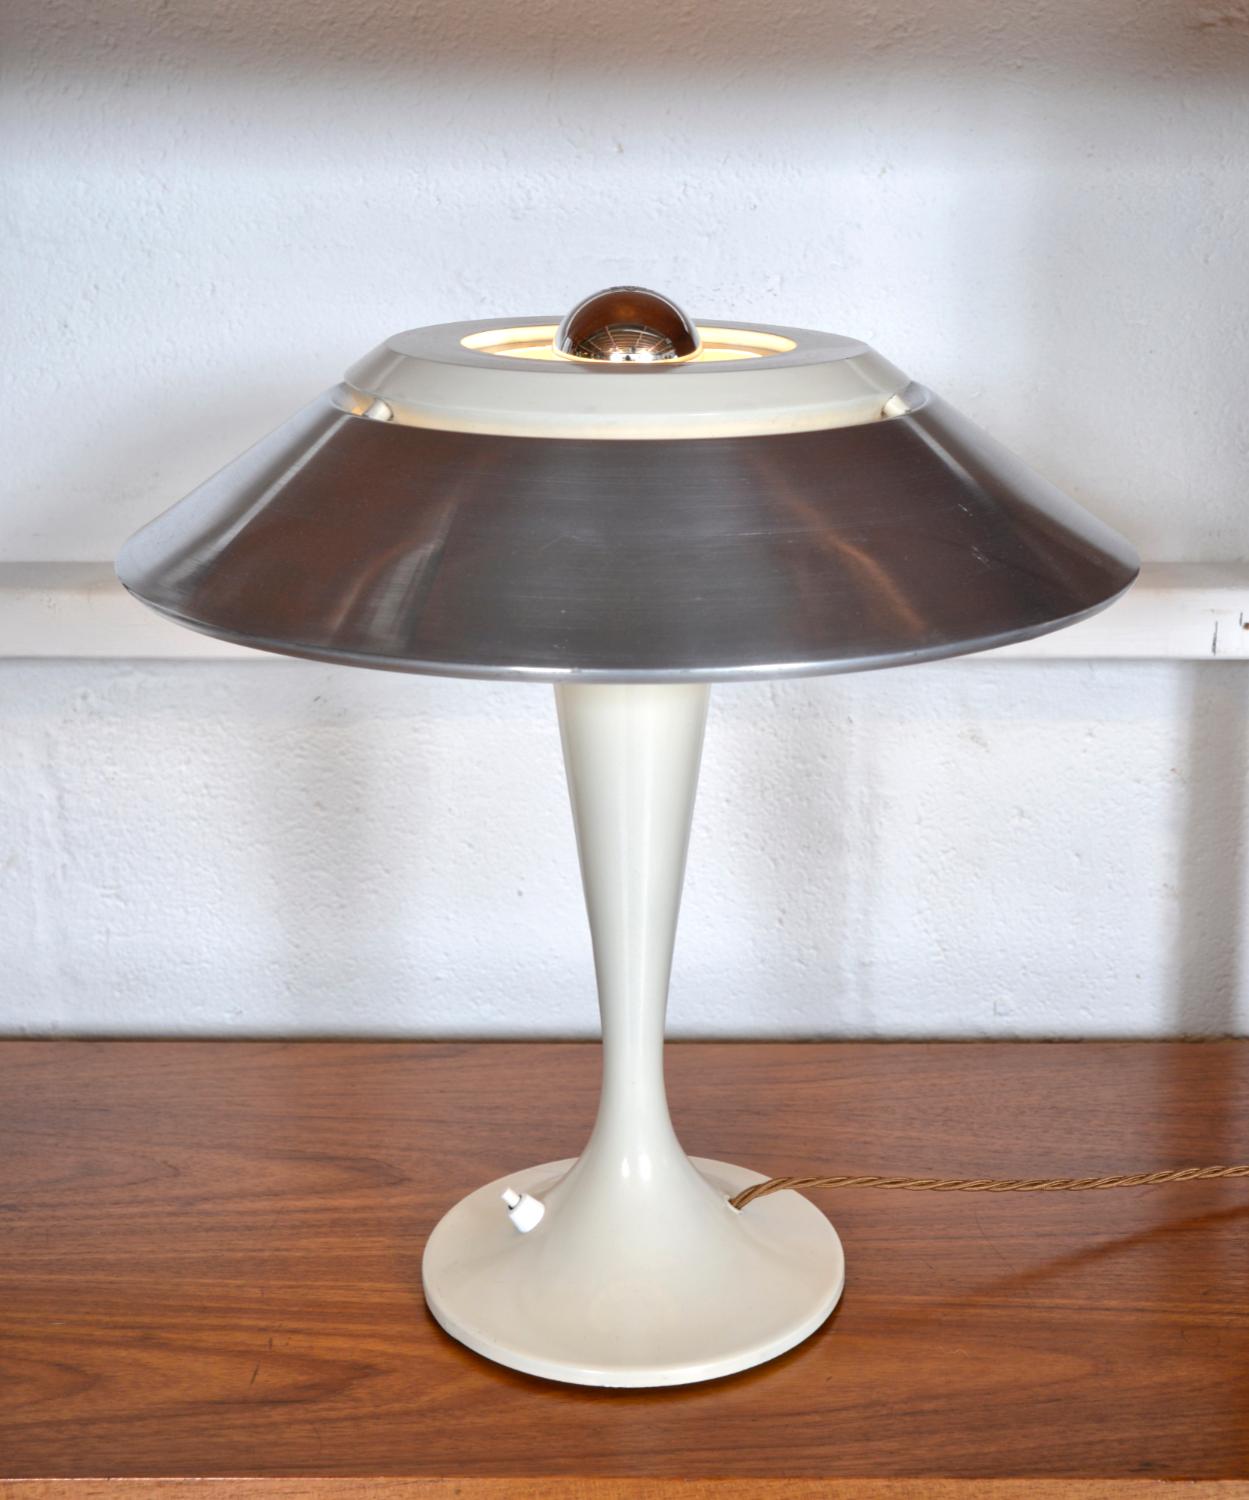 This beautiful 1960s French table lamp by Arlus has a very stylish Space Age look. Its slender conical shaft is elegantly curved and goes down to a plate foot metal base, which is white in colour, as is the finial to the top of the spun aluminium